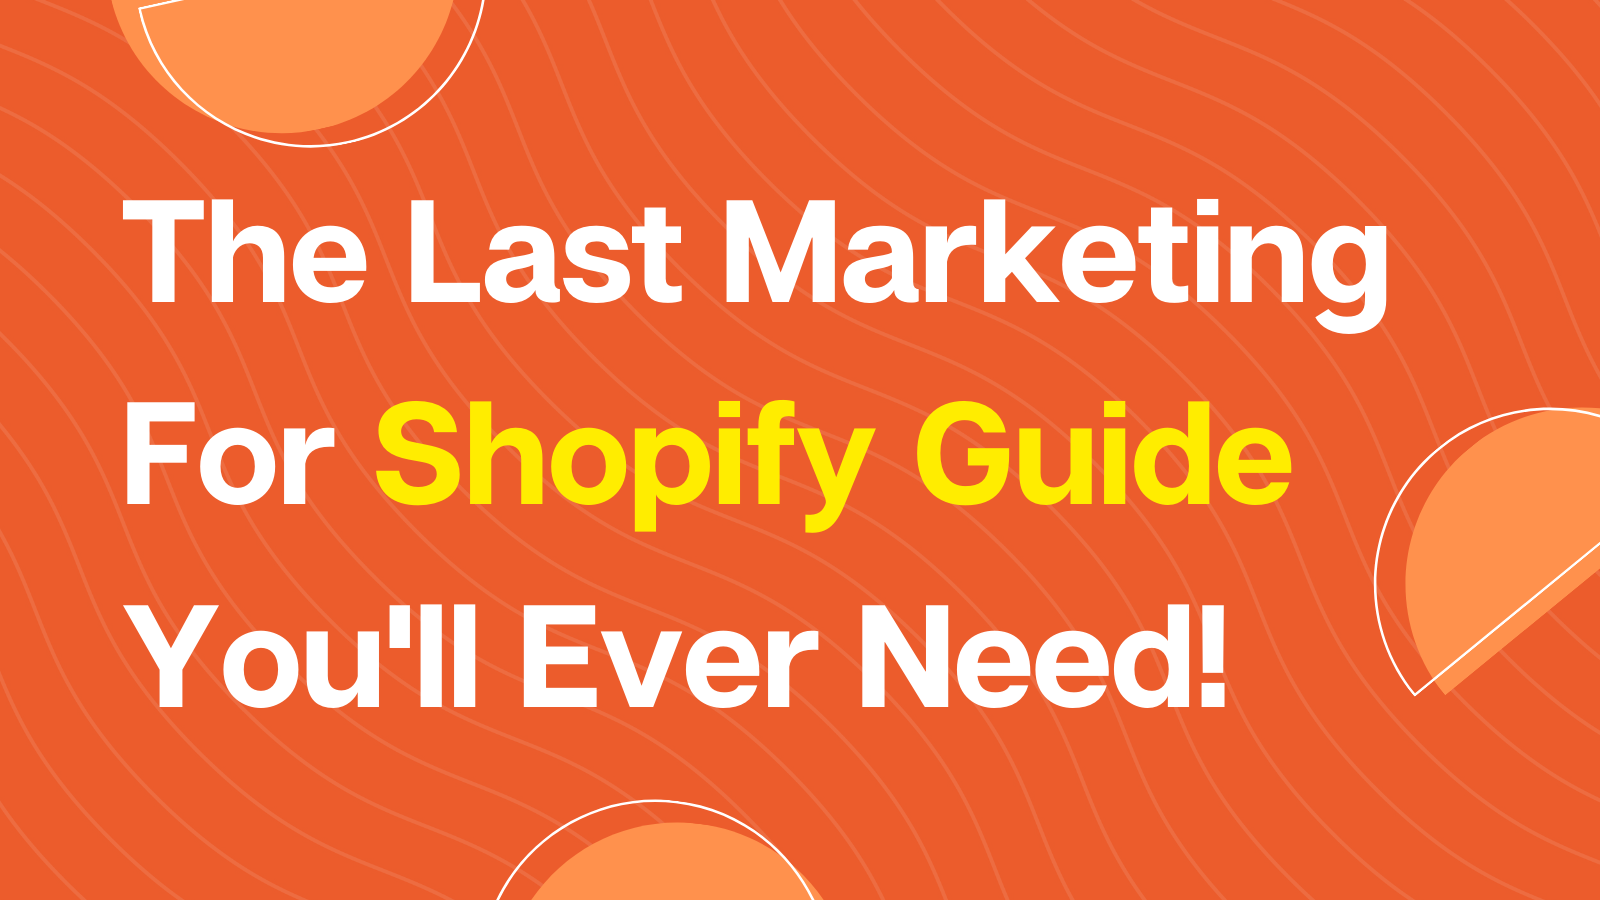 The Last Marketing For Shopify Guide You'll Ever Need!